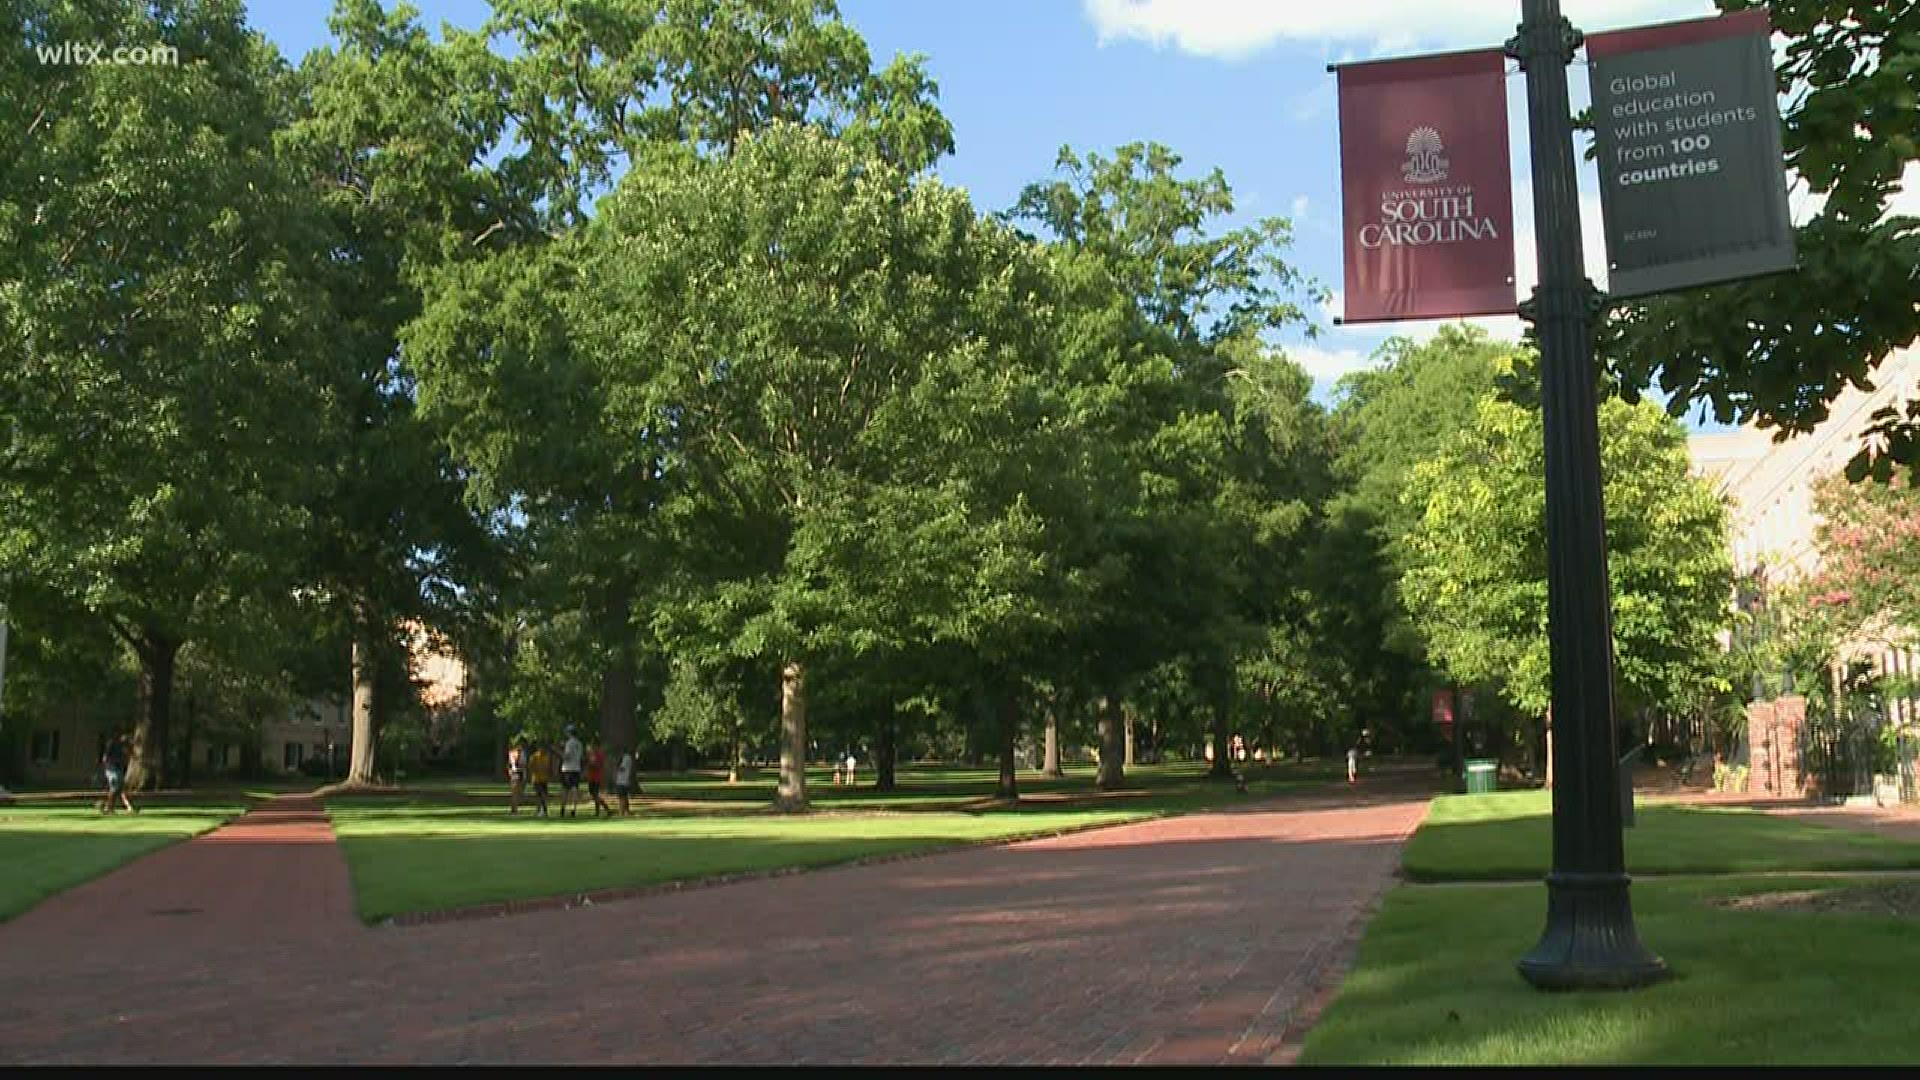 The University of South Carolina said Wednesday it plans to resume in-person instruction on campus when the fall 2020 semester begins.